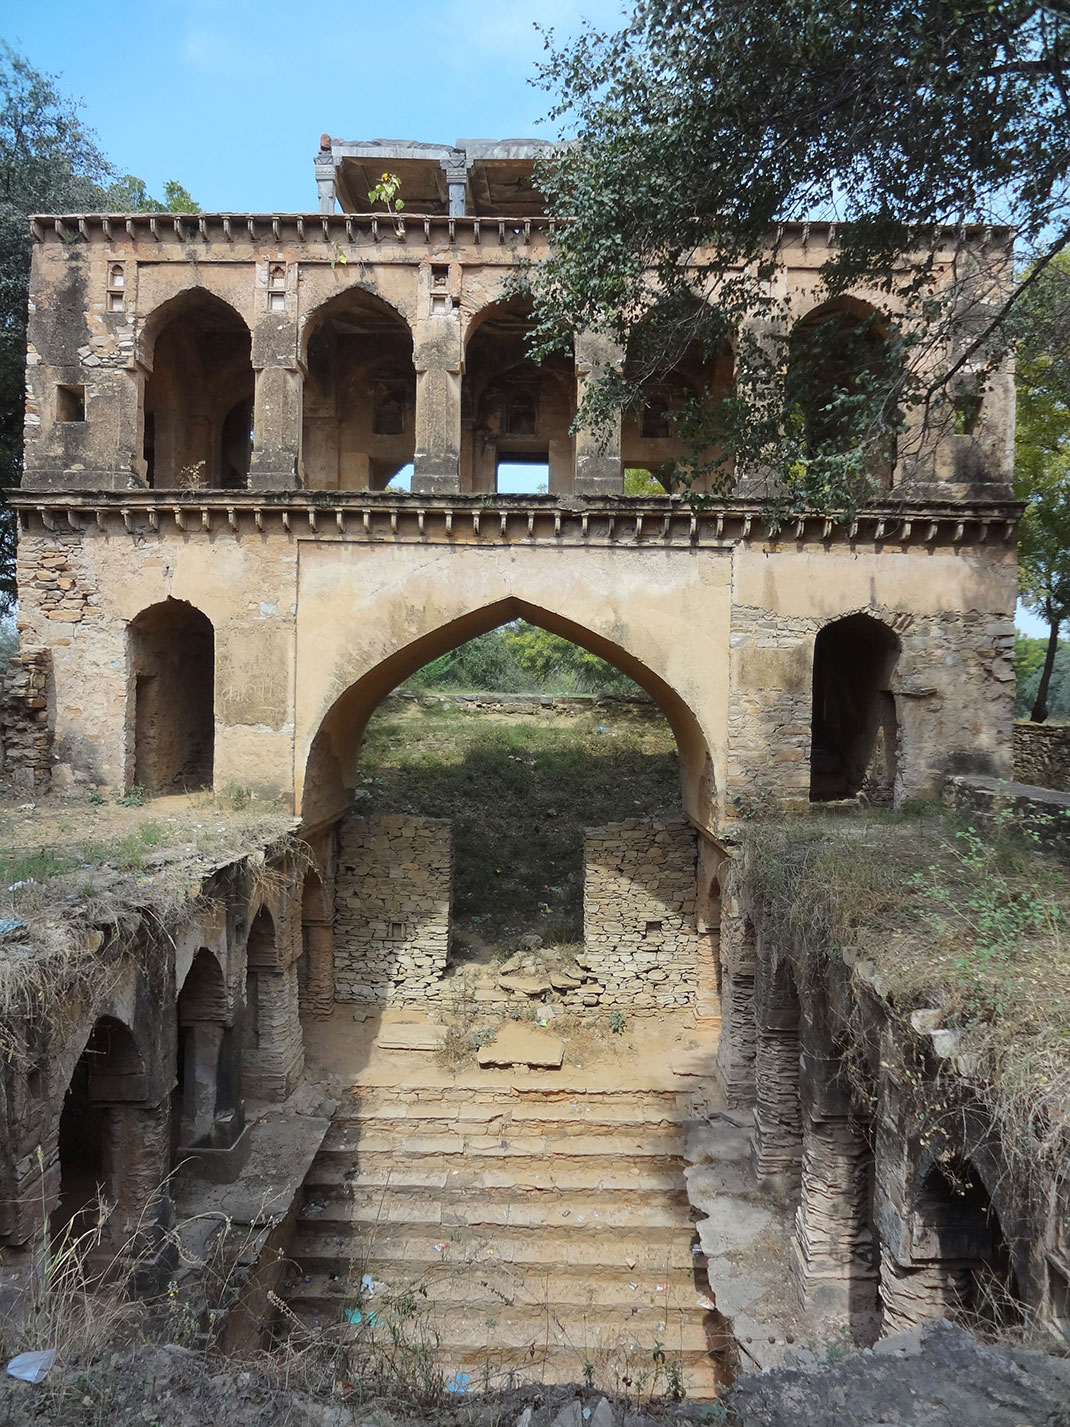 Admire These 2000 Year Old Somptous Buildings In India Destined To Disappear-18